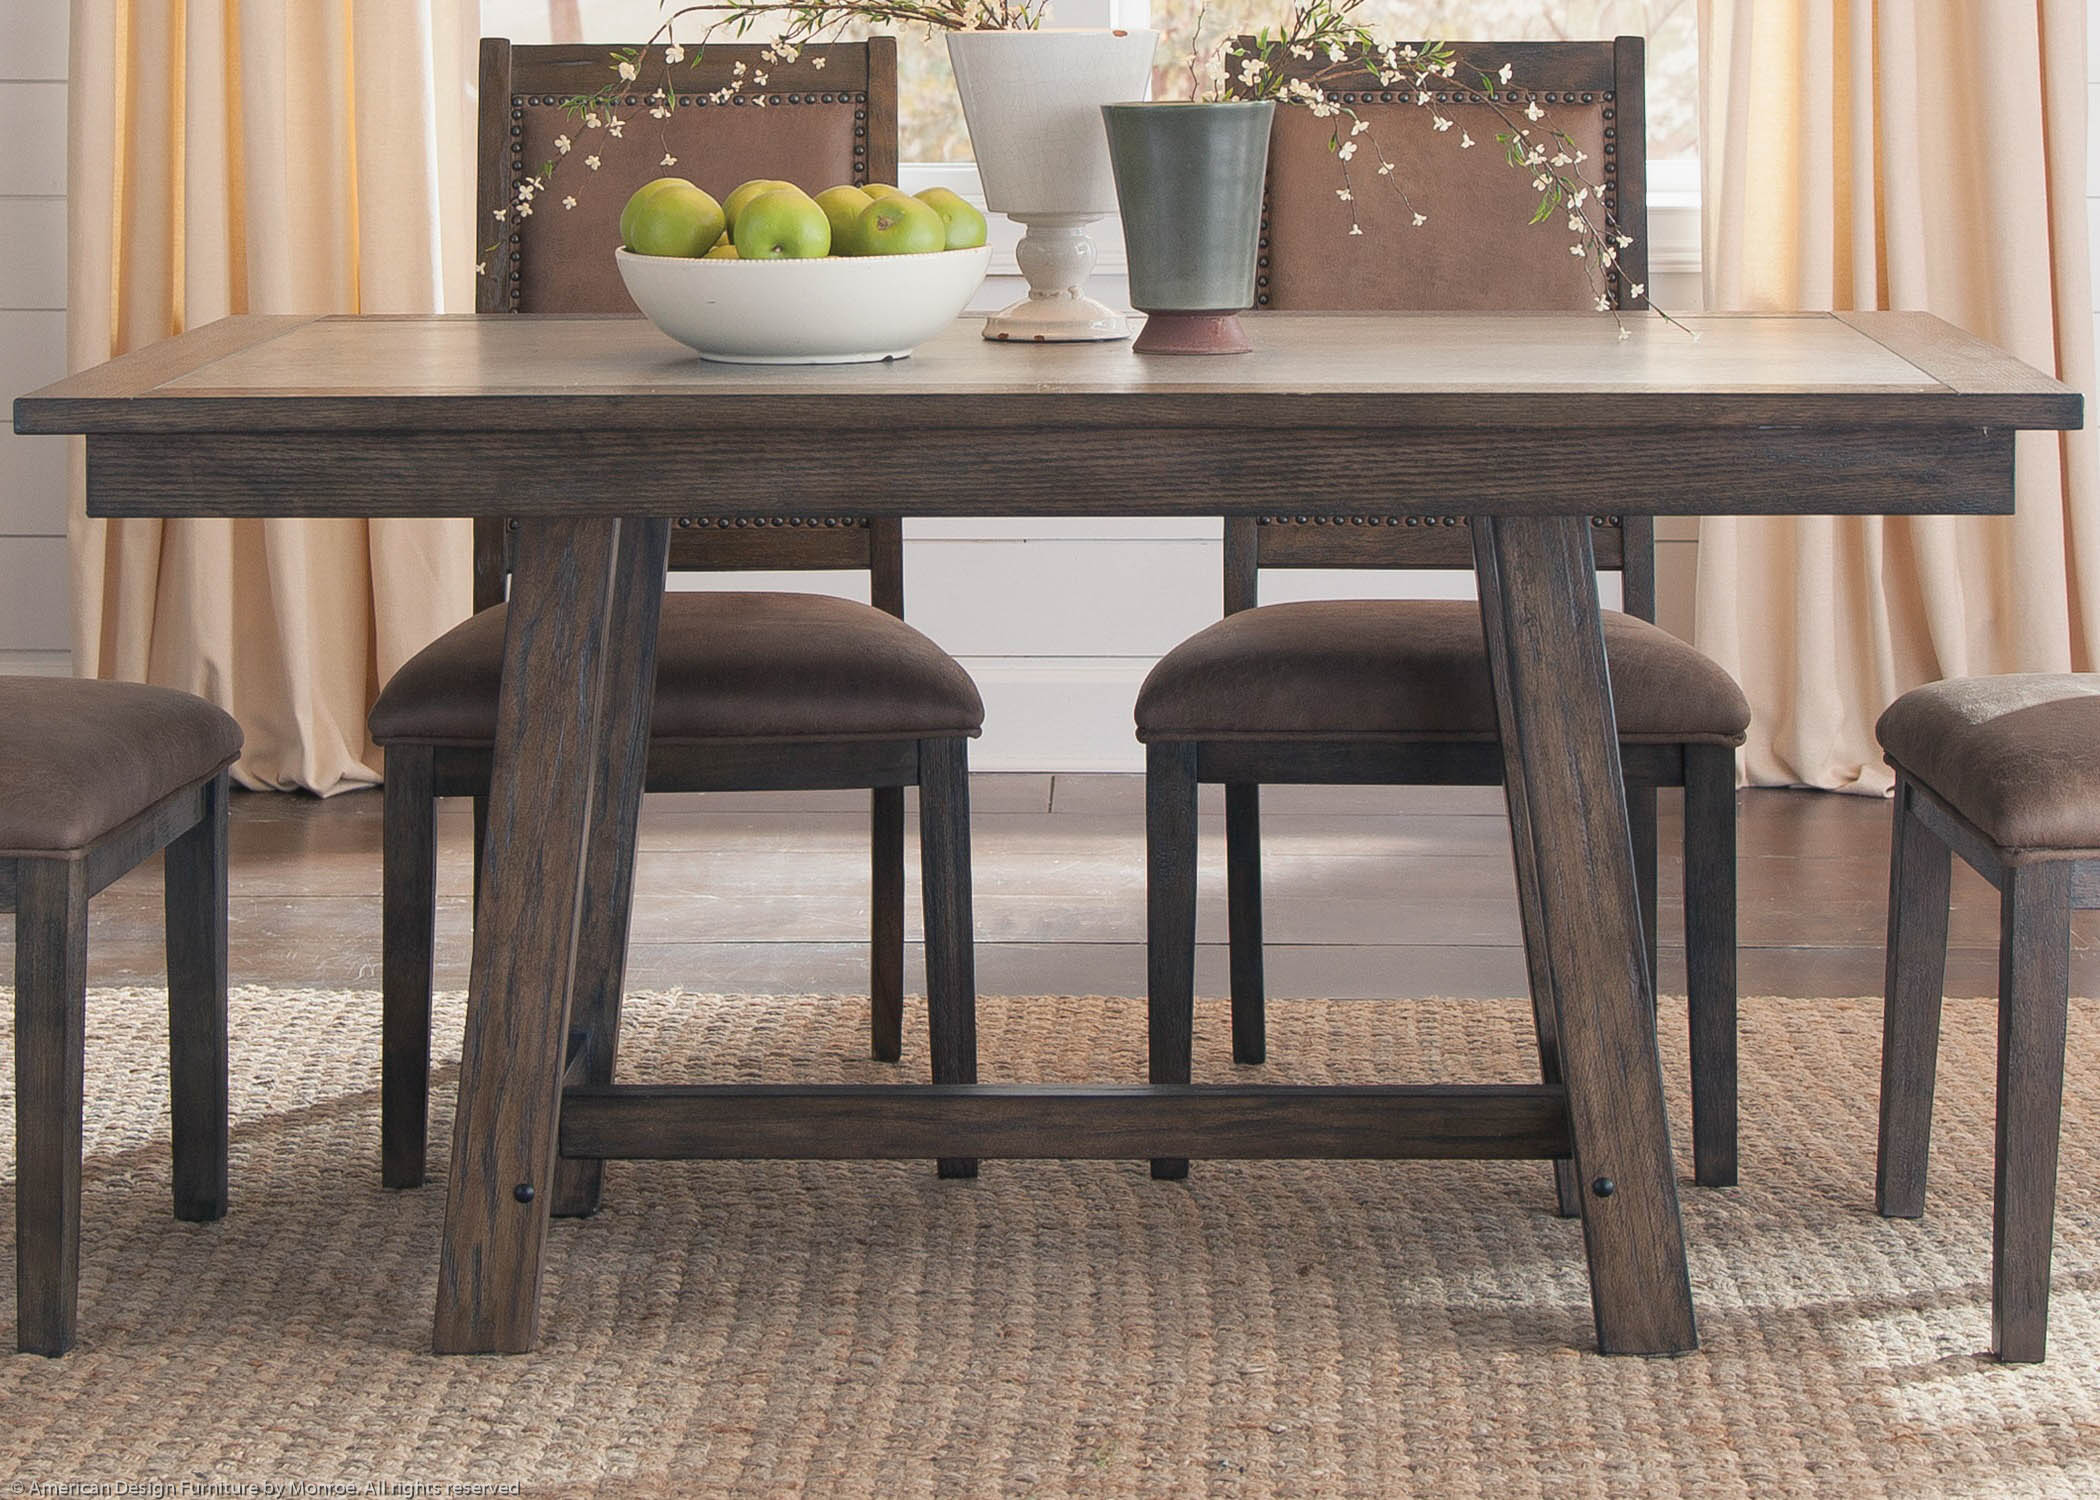 Greystone Casual Table Pic 1 (Heading Trestle Table 1)